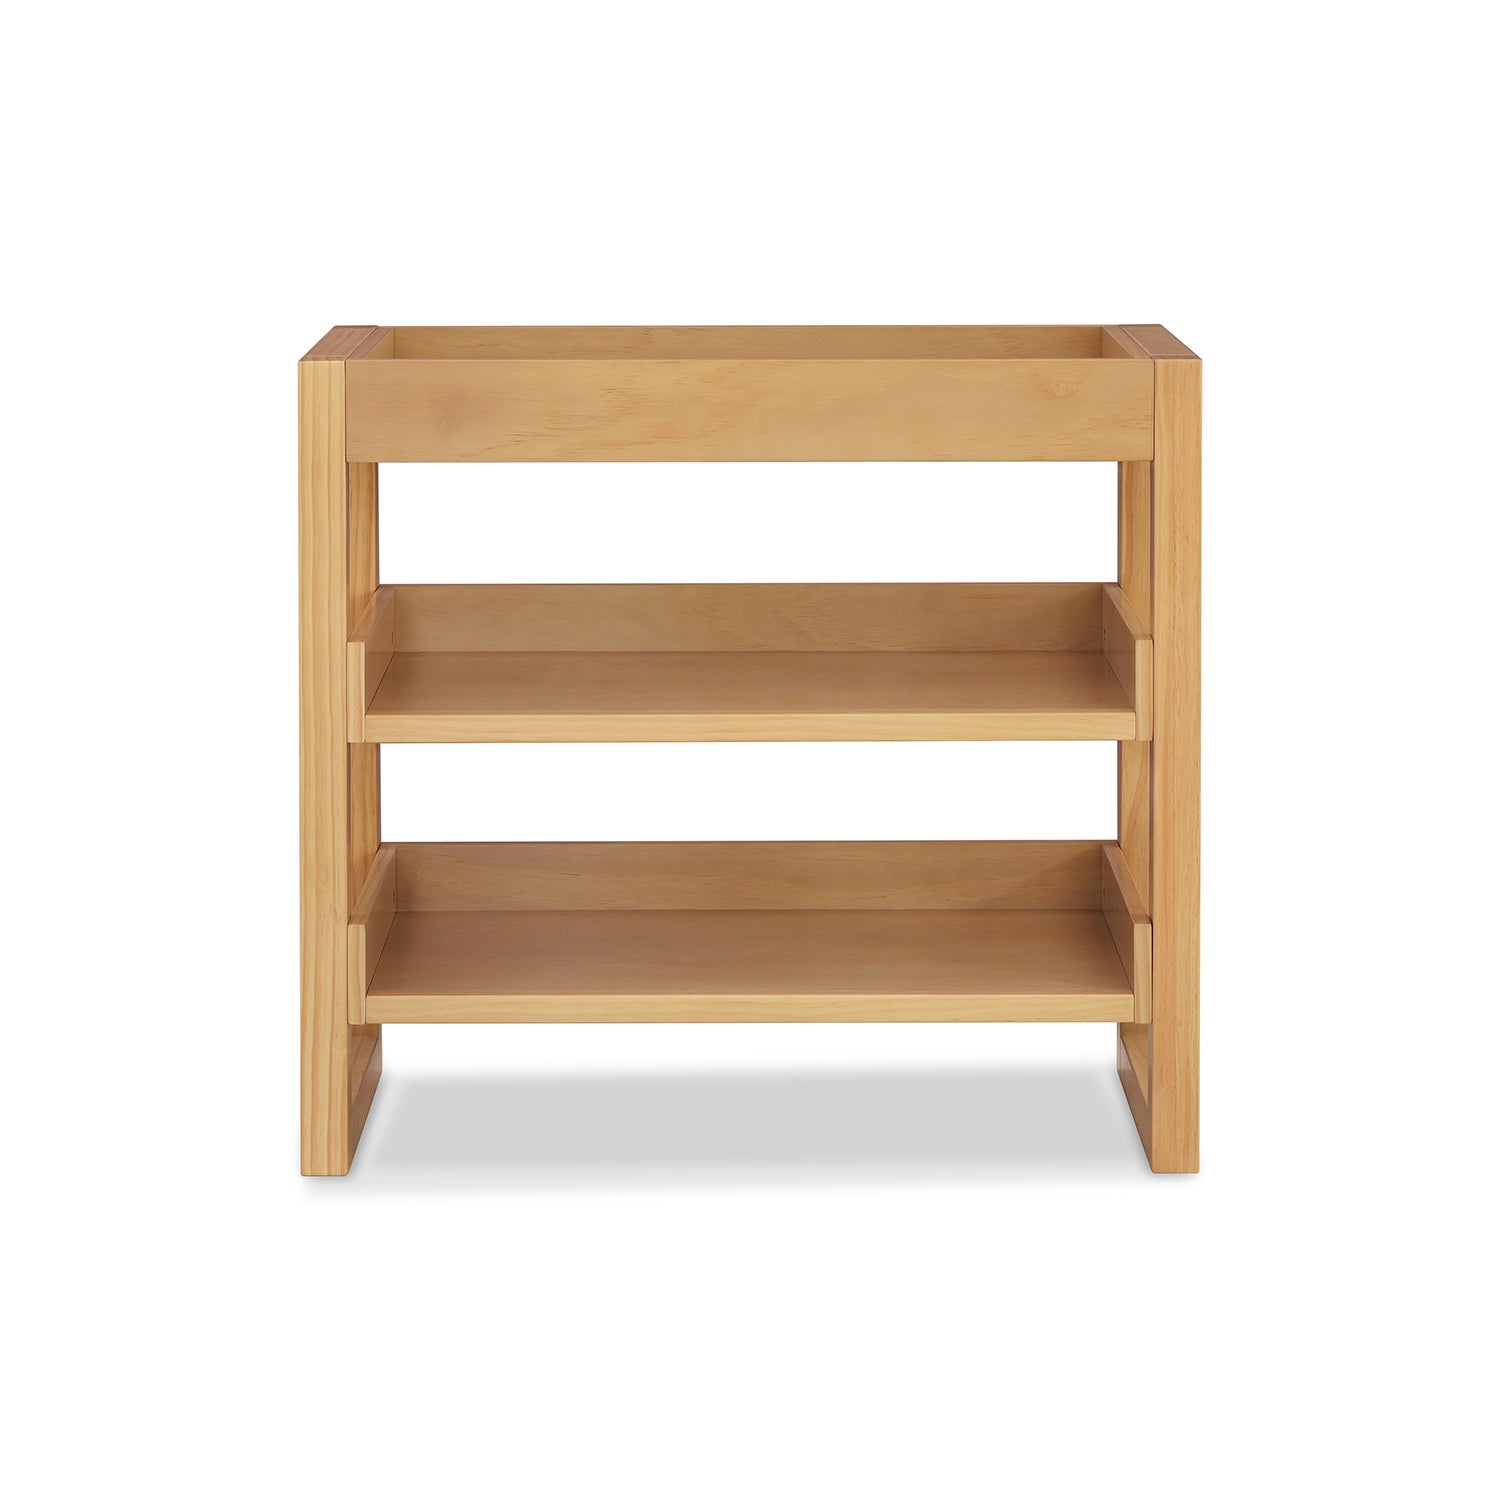 Wood changing table with shelves